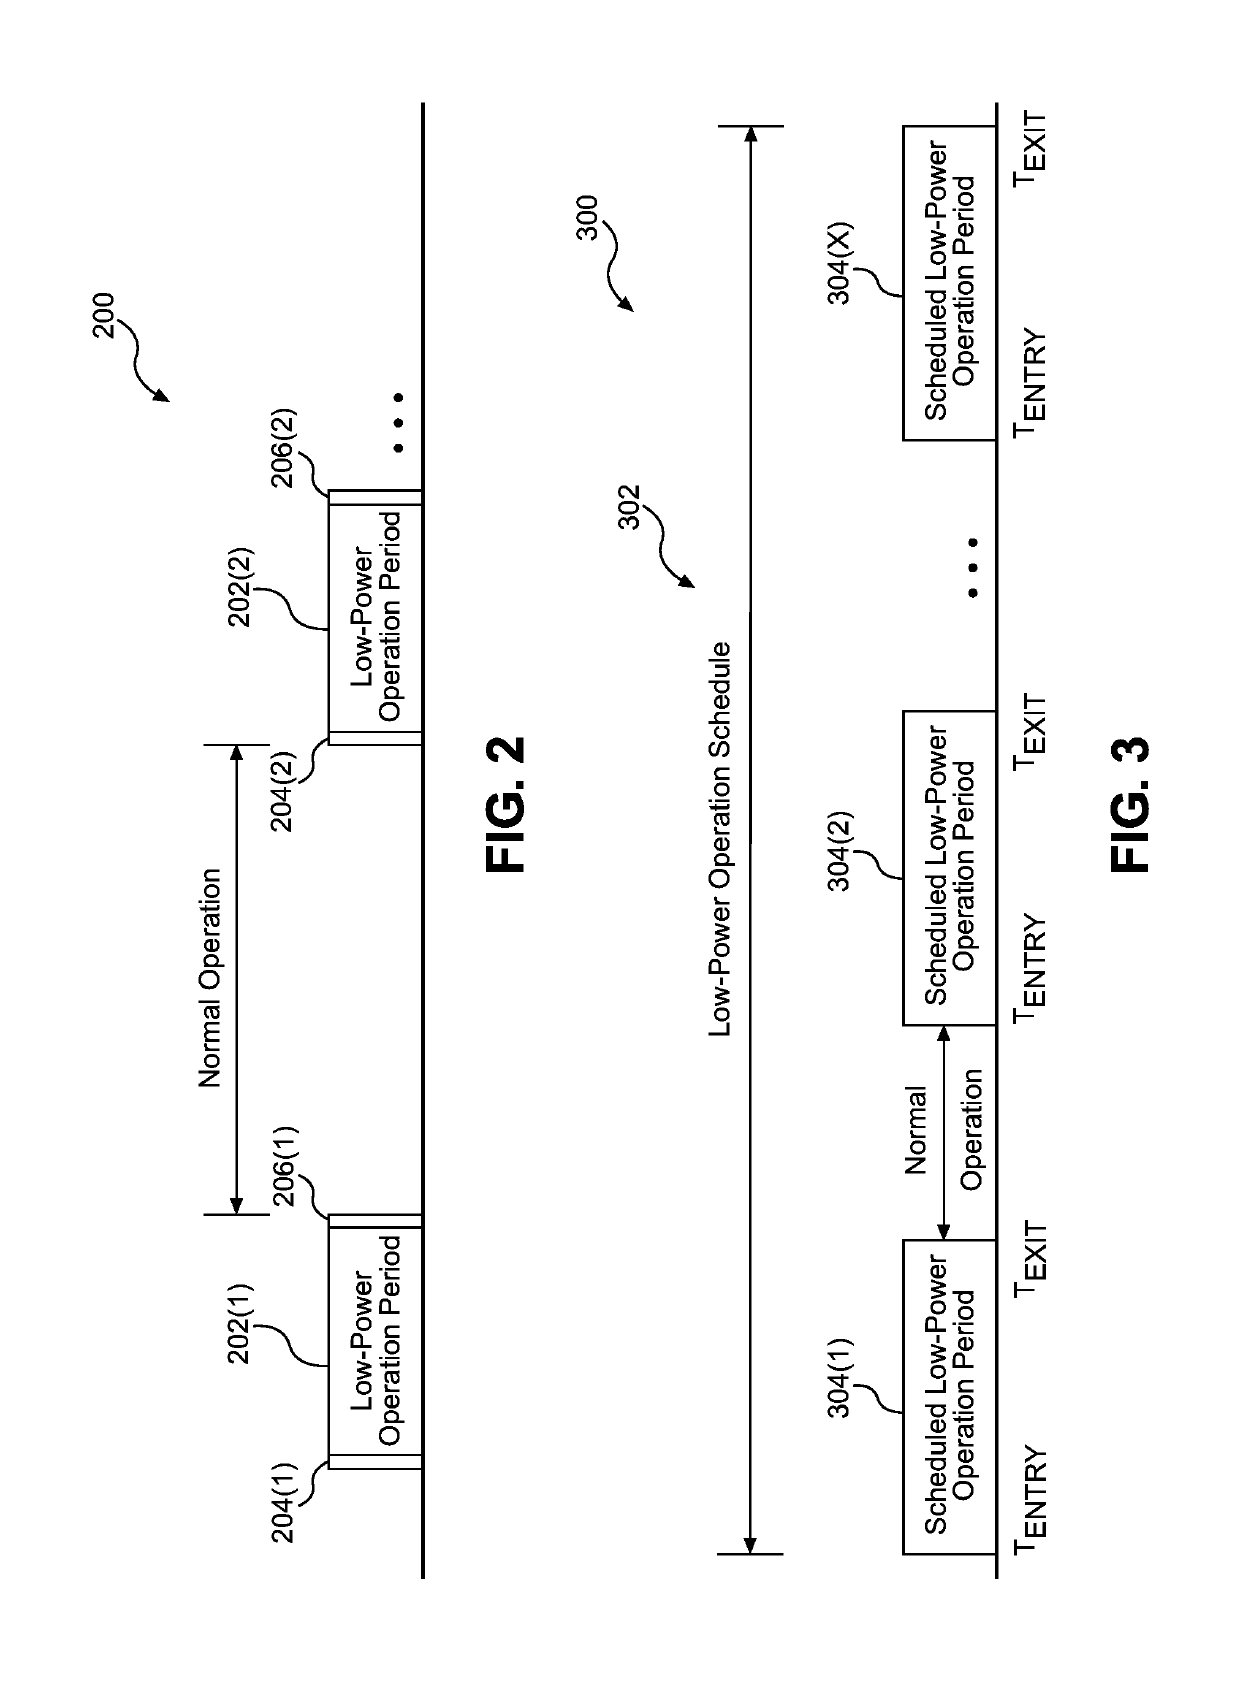 Universal serial bus (USB) host and client devices for supporting scheduled low-power operations